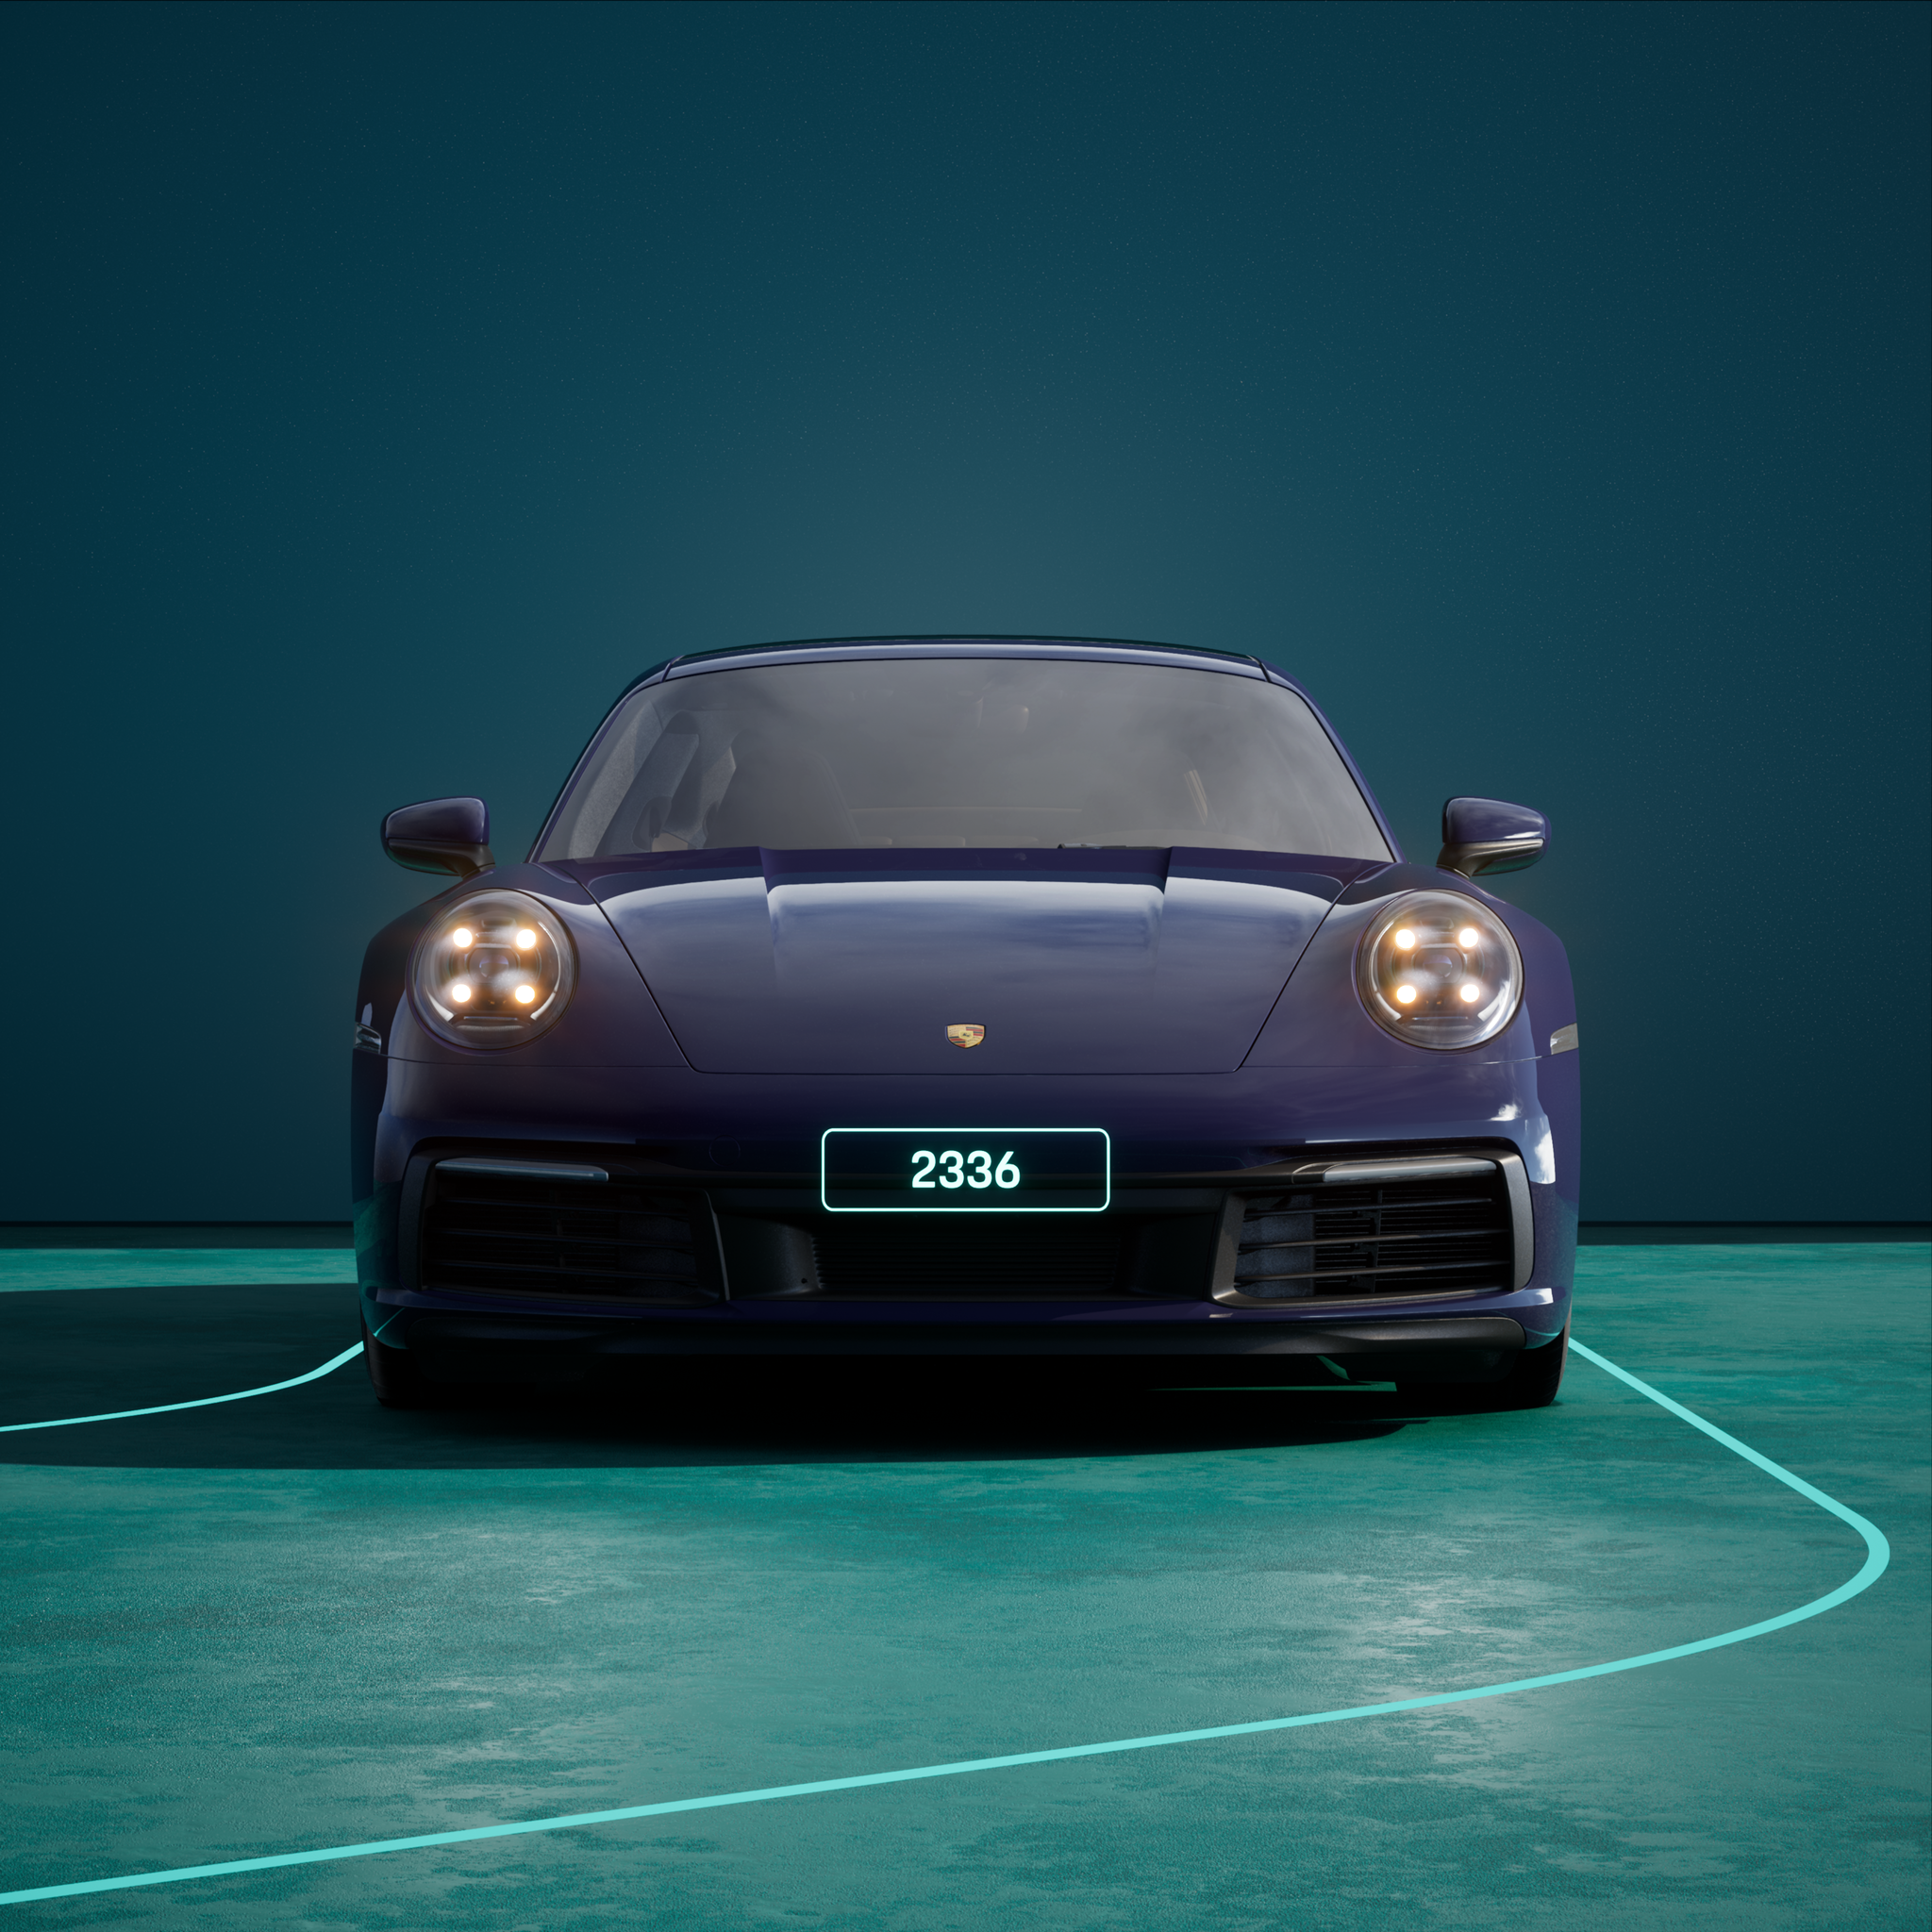 The PORSCHΞ 911 2336 image in phase